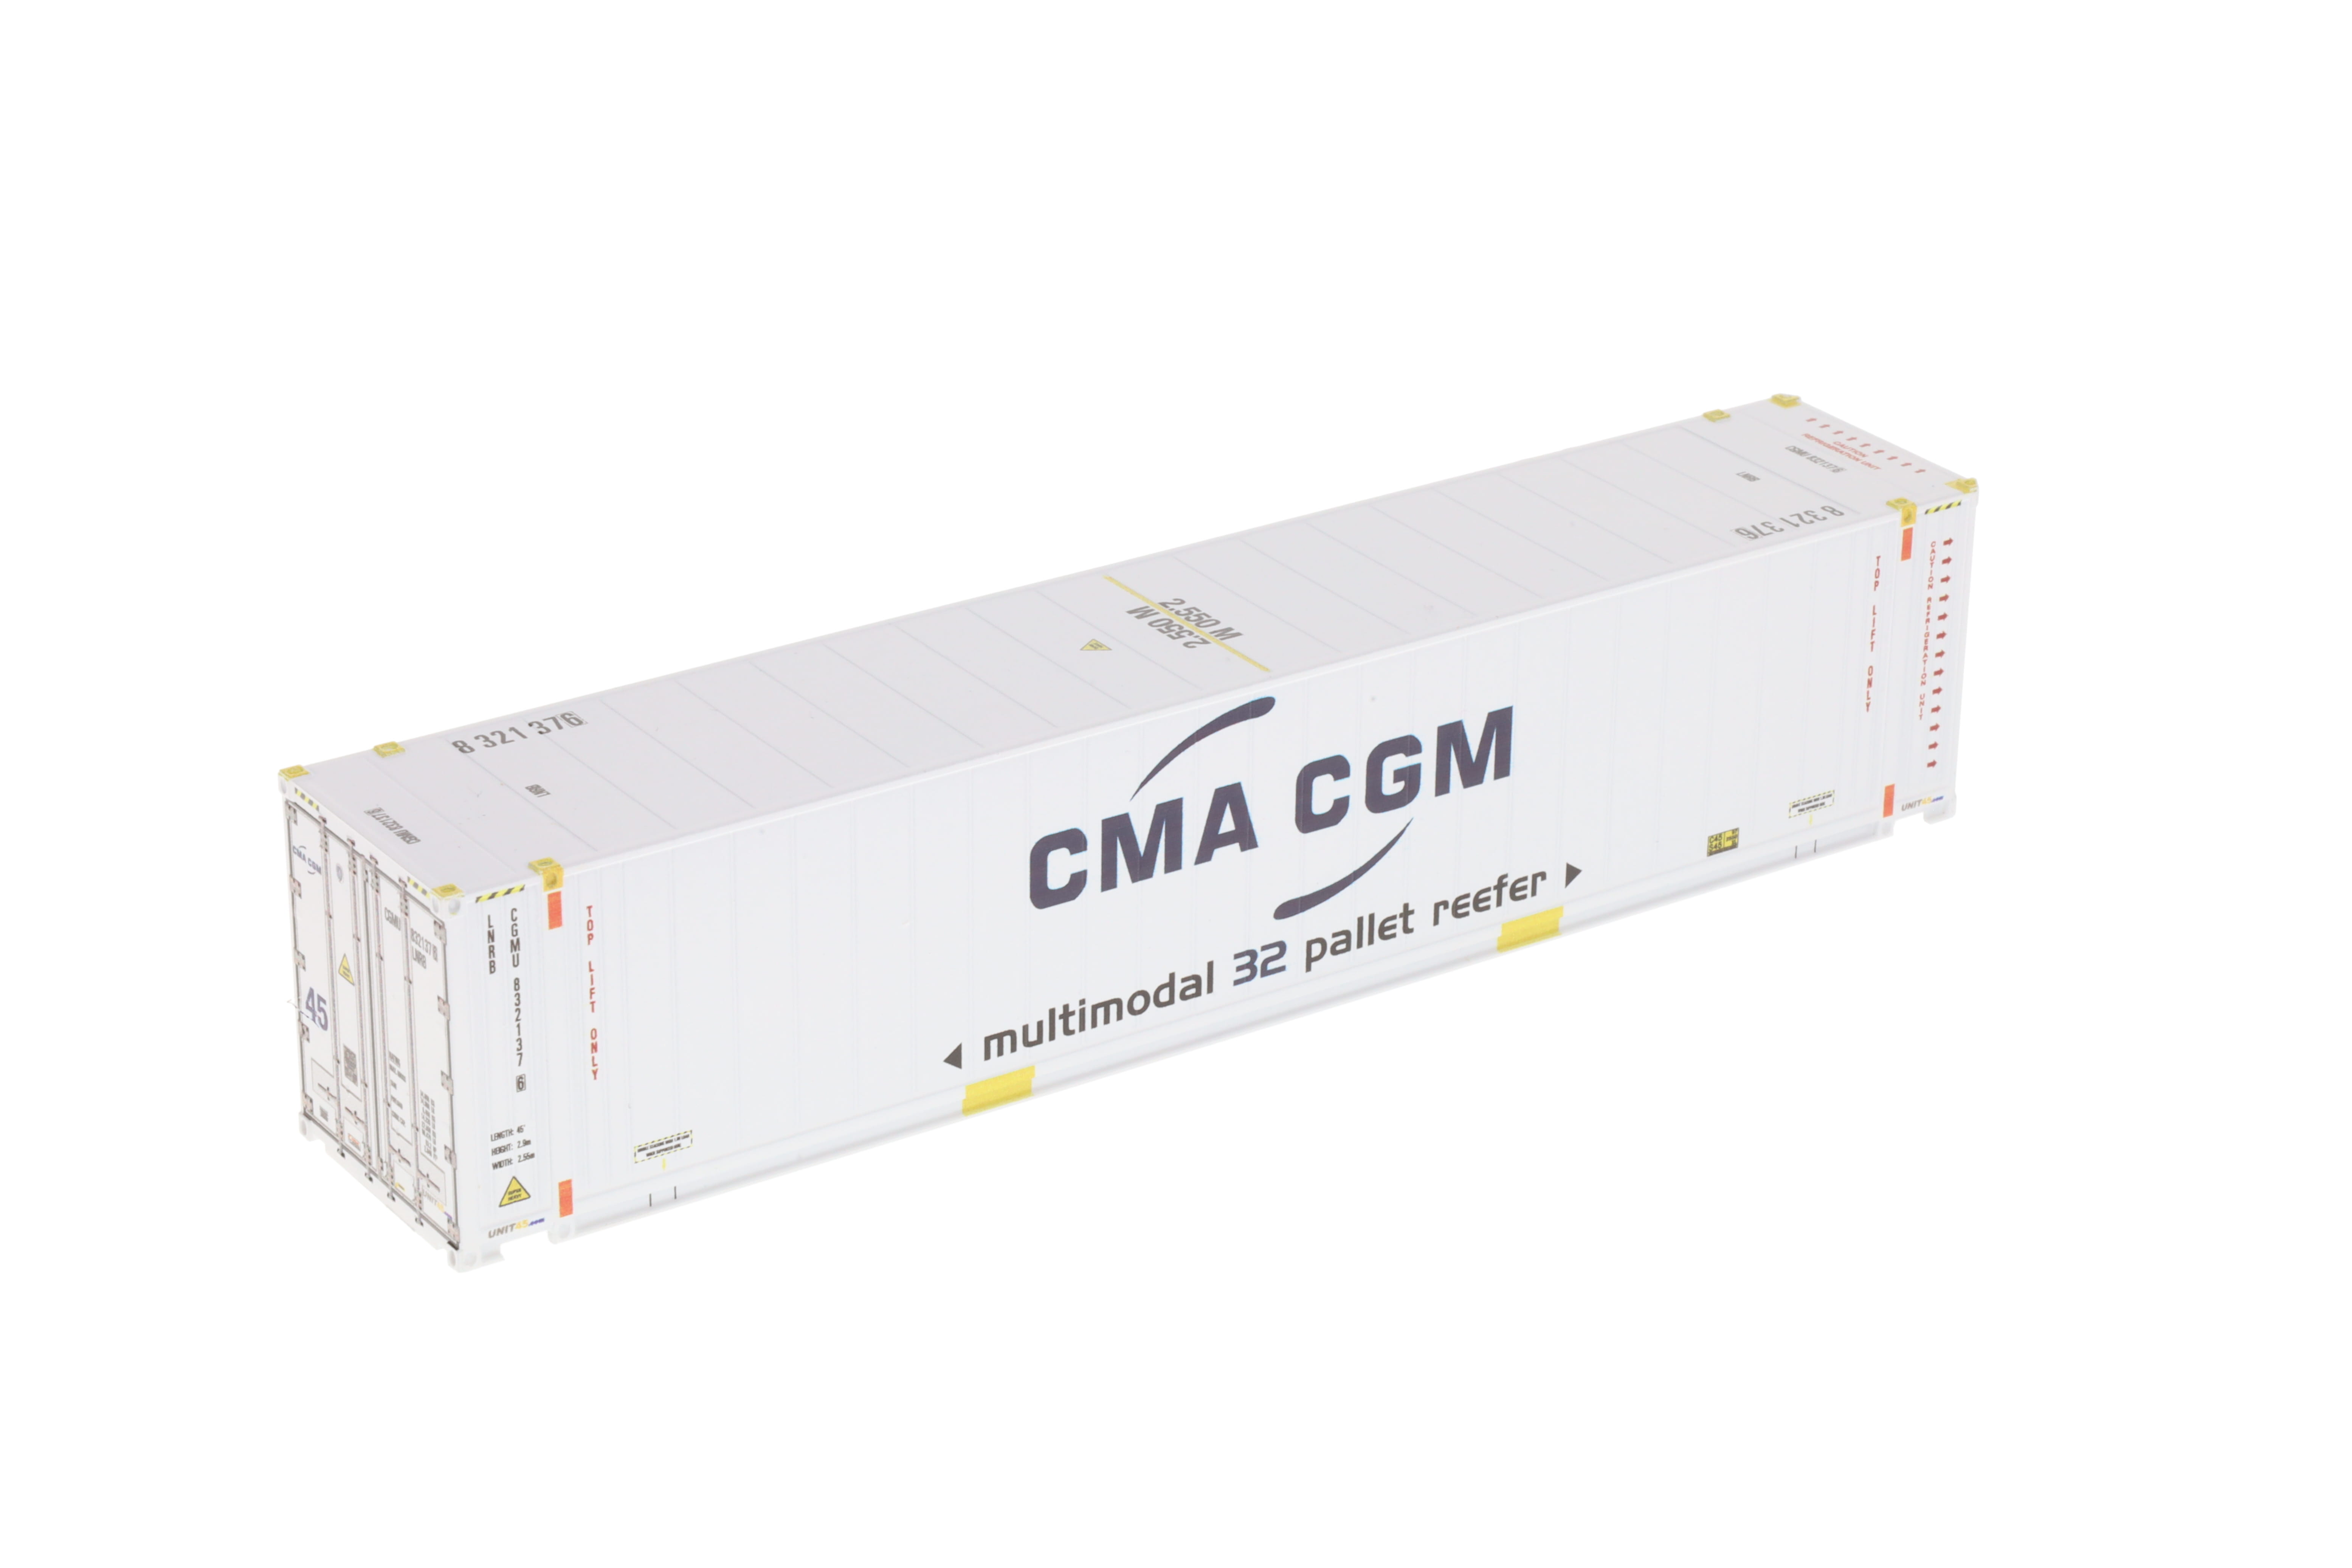 1:87 45´ Container CMA CGM WB-A / Ct45´ (Euro) Reefer (E), "multimodal 32 pallet reefer", UNit 45, # CGMU 832137